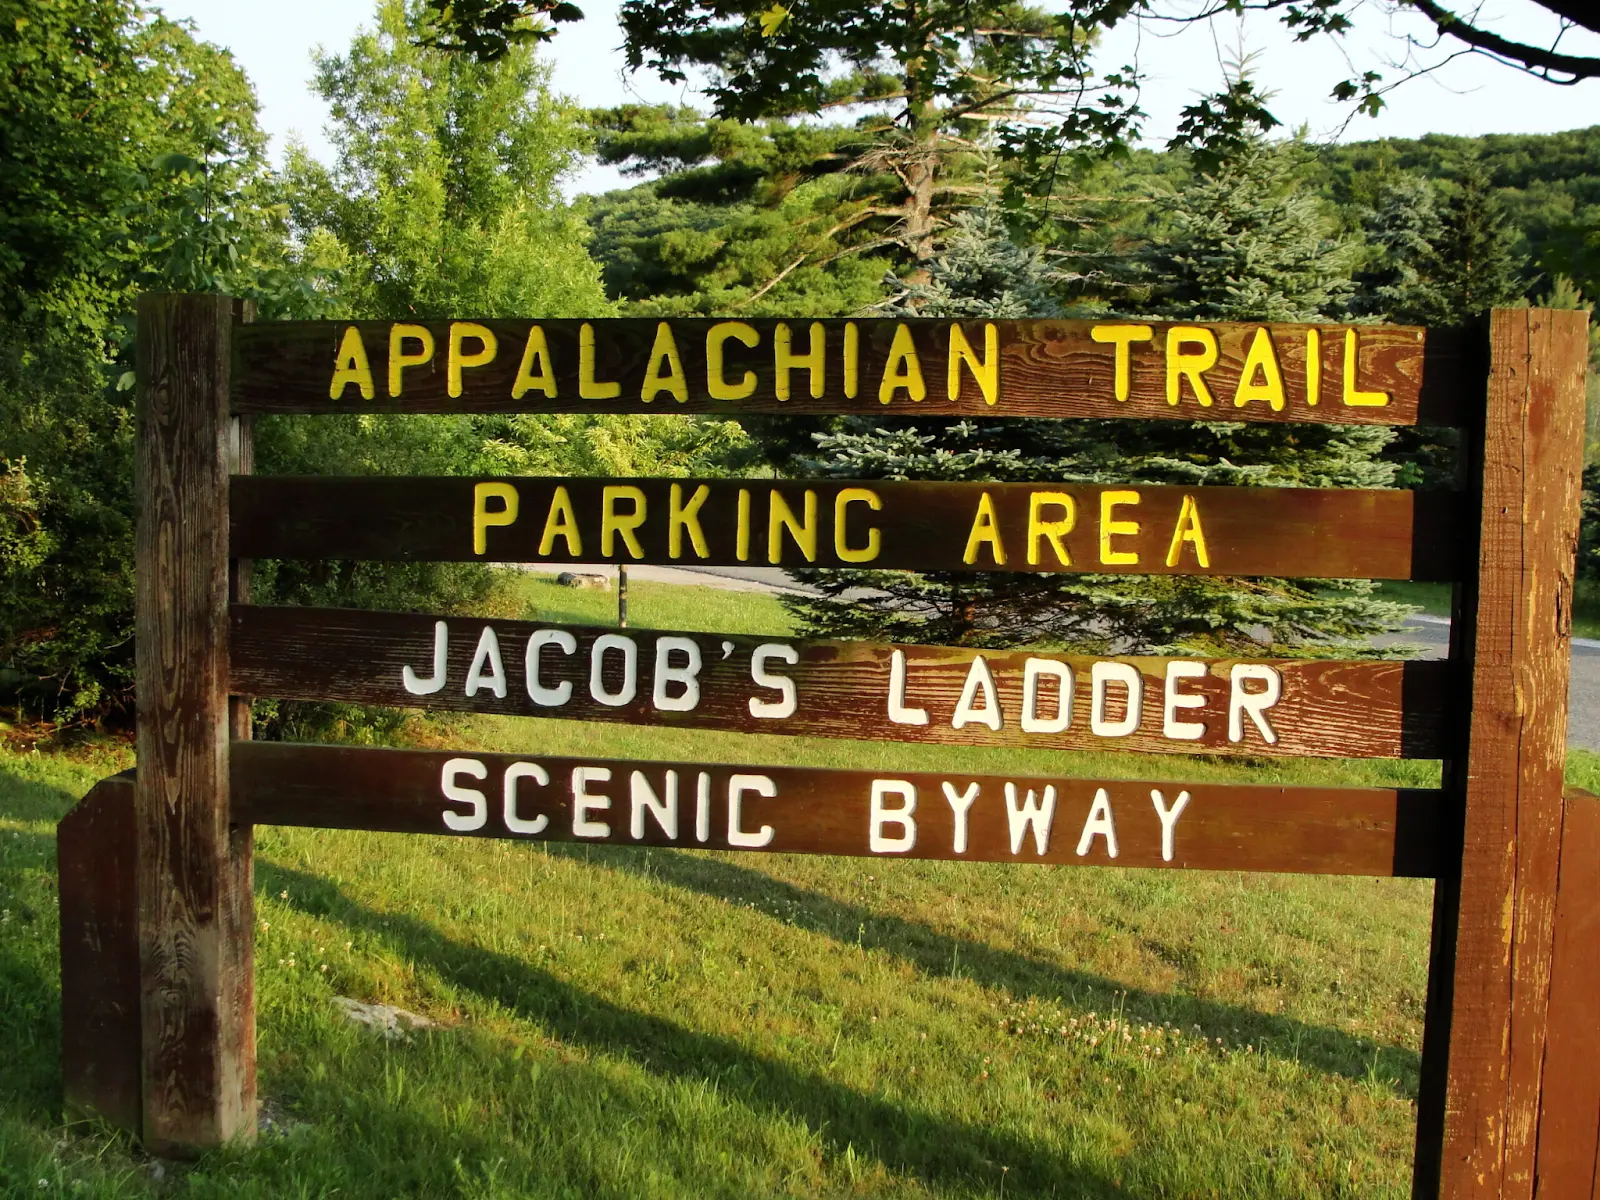 Jacob's Ladder Scenic Byway